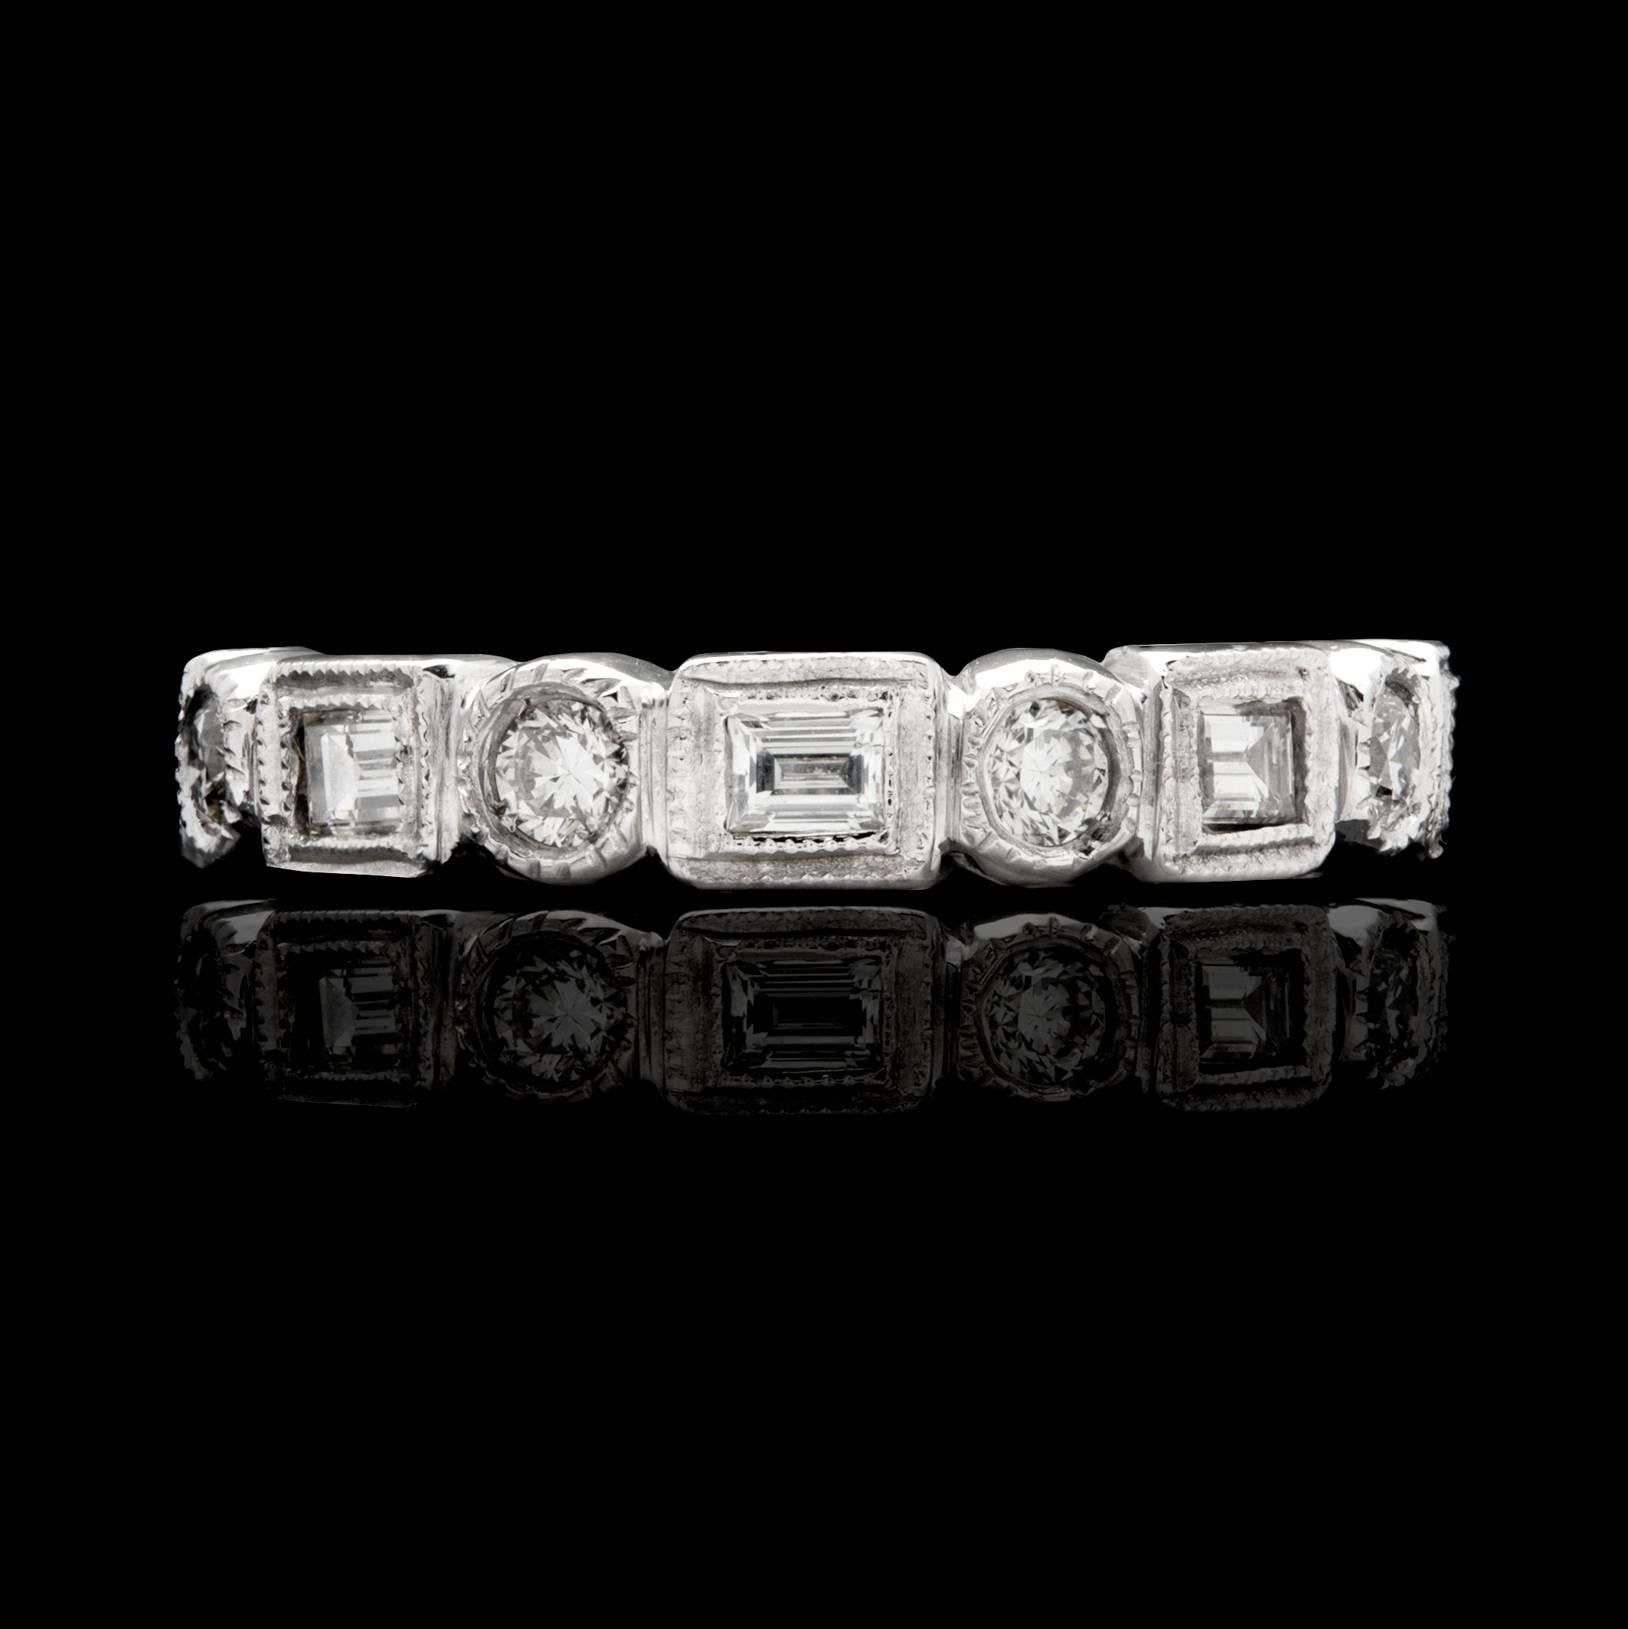 Handcrafted platinum eternity band features alternating round brilliant and baguette-cut diamonds with milgrain detailing on the bezels. The G/H color, VS clarity diamonds total 0.64cttw. The ring is currently a size 3 3/4 and can be sized up or